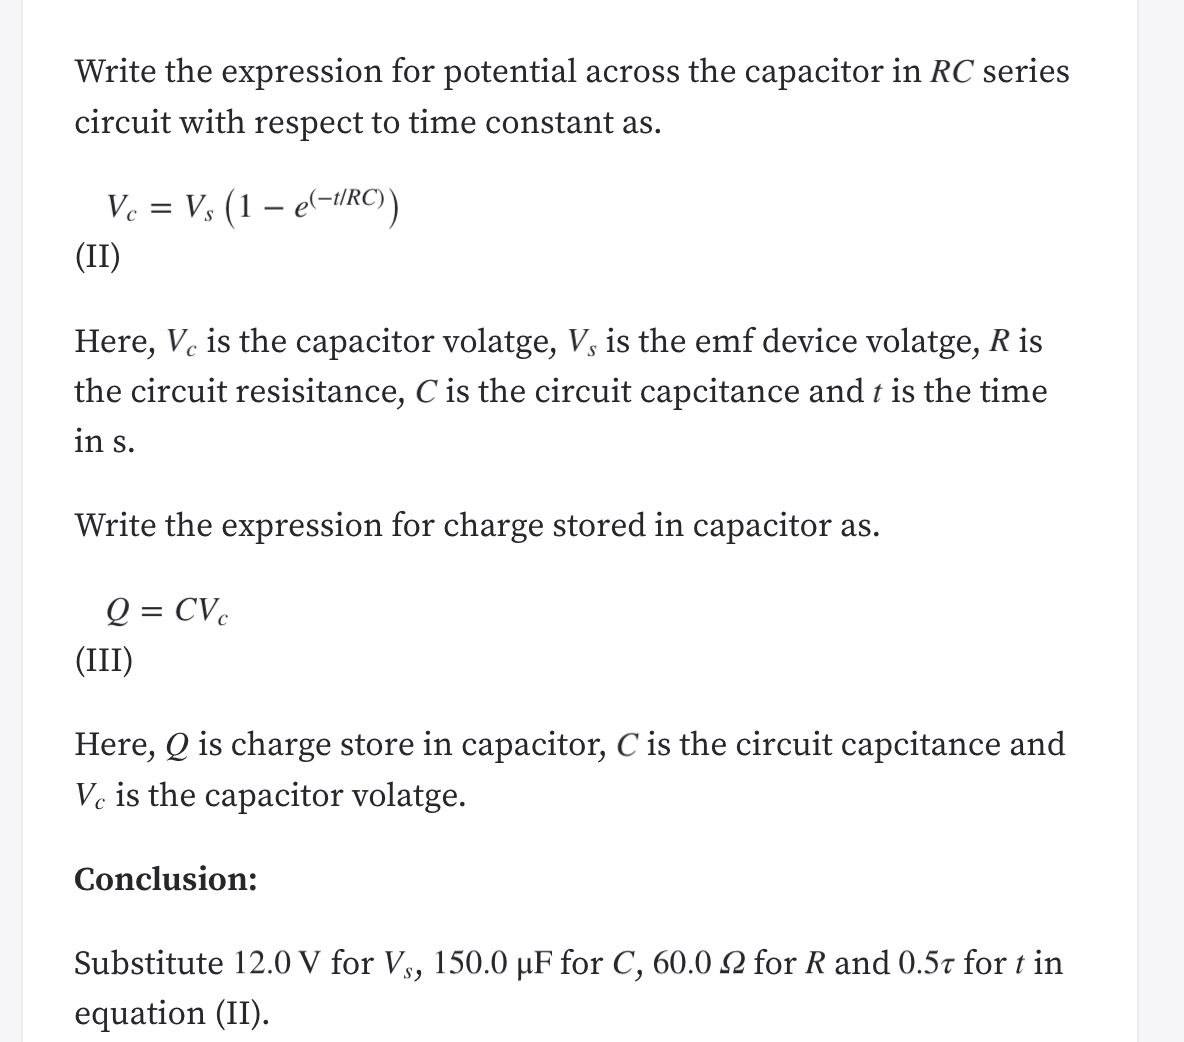 Write the expression for potential across the capacitor in RC series
circuit with respect to time constant as.
Ve = V, (1 – e(-iRC)
(II)
Here, V. is the capacitor volatge, V3 is the emf device volatge, R is
the circuit resisitance, C is the circuit capcitance and t is the time
in s.
Write the expression for charge stored in capacitor as.
Q = CVc
(III)
Here, Q is charge store in capacitor, C is the circuit capcitance and
Ve is the capacitor volatge.
Conclusion:
Substitute 12.0 V for Vs, 150.0 µF for C, 60.0 2 for R and 0.5t for t in
equation (II).
